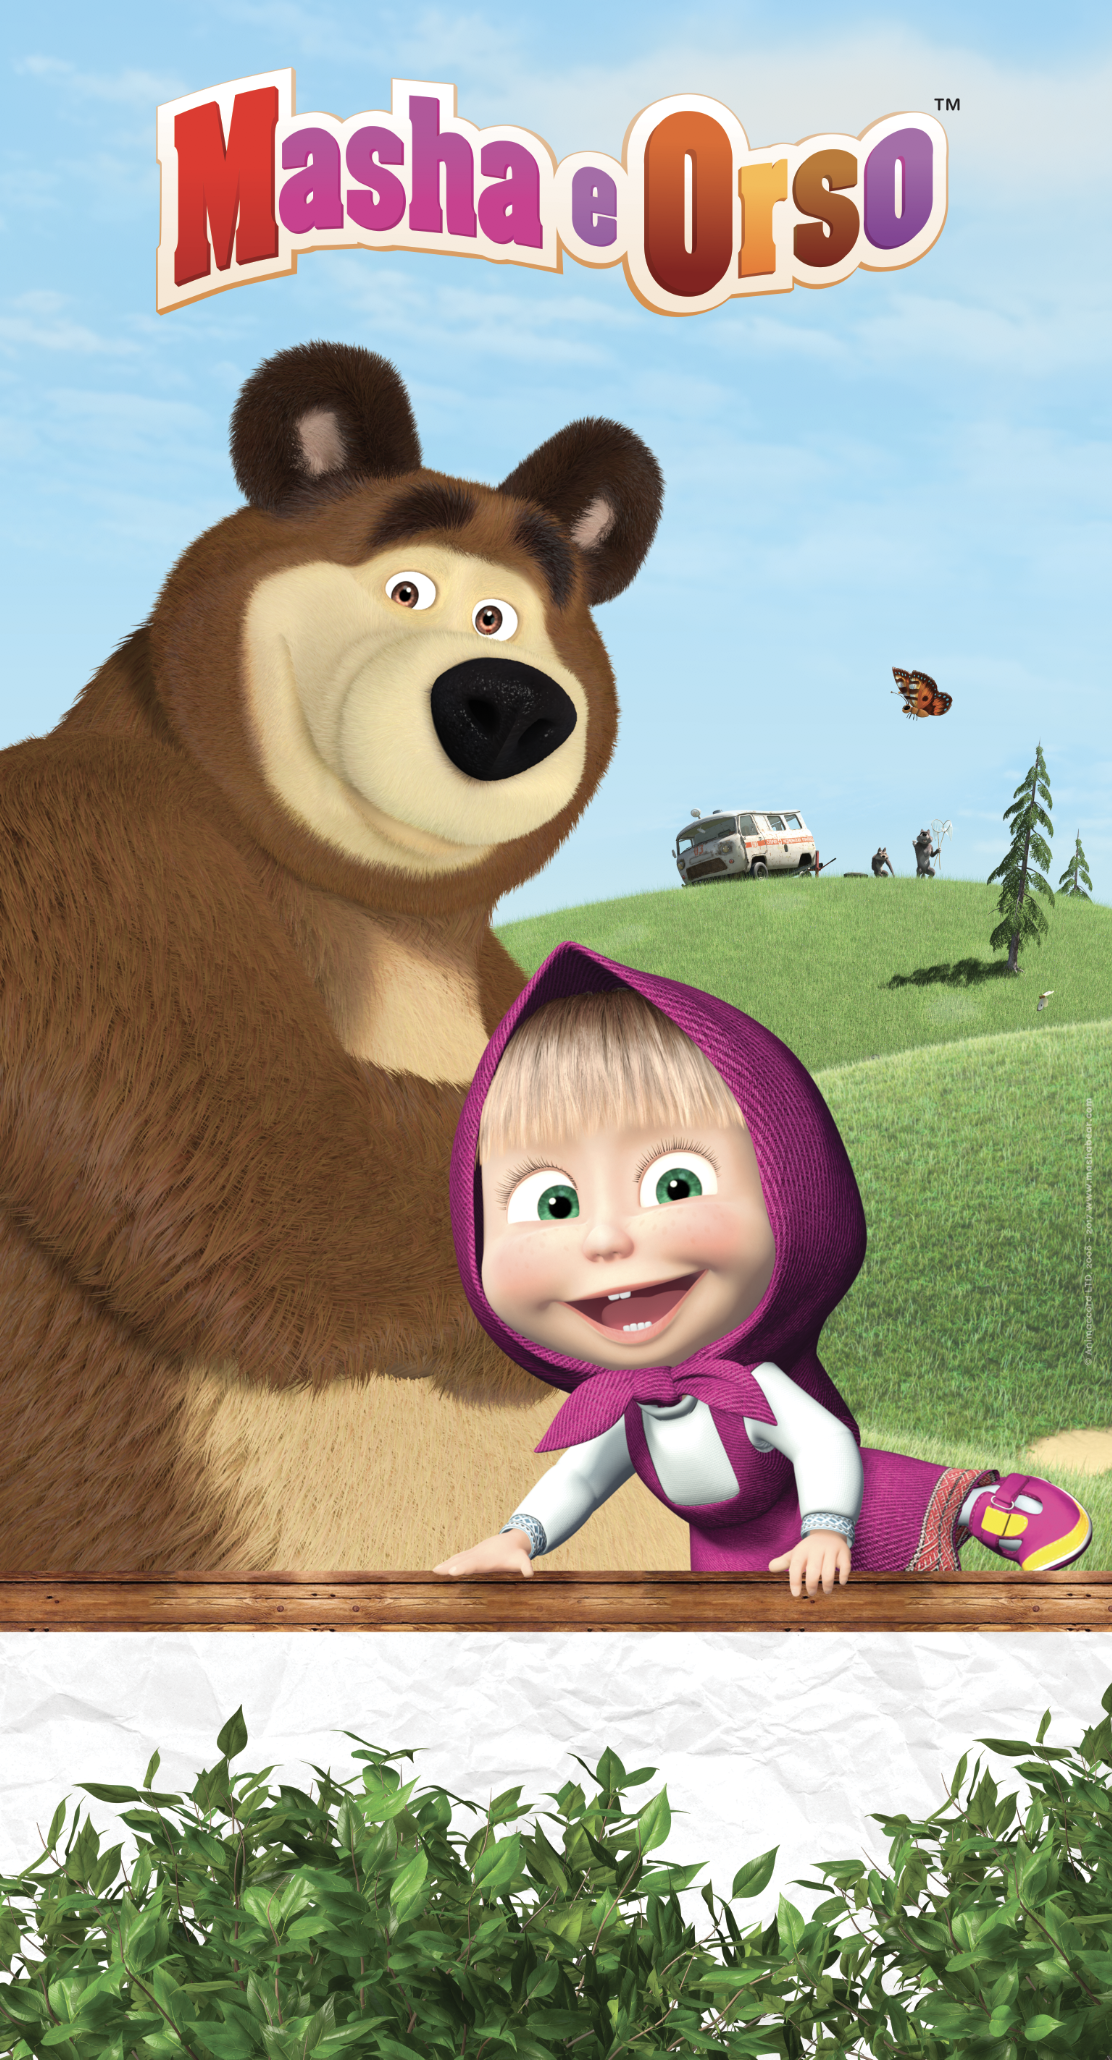 Histed masha and bear. Маша and the Bear. Маша и медведь фулл. Leolandia Masha e Orso 2017. Маша и медведь на английском языке.